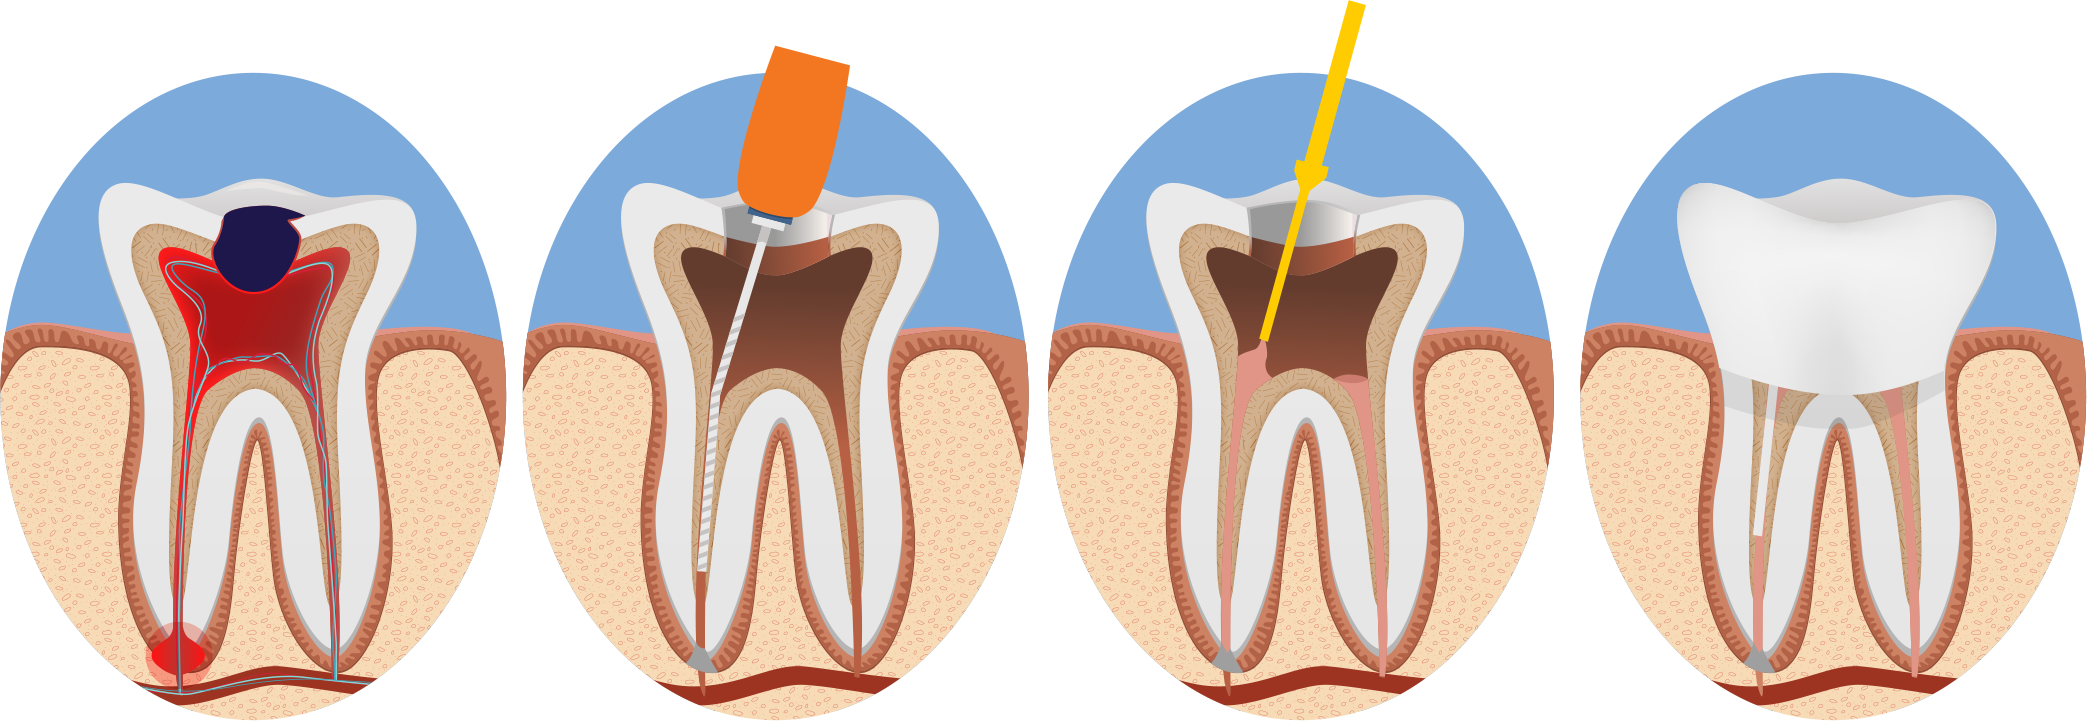 inspire root canal illustration